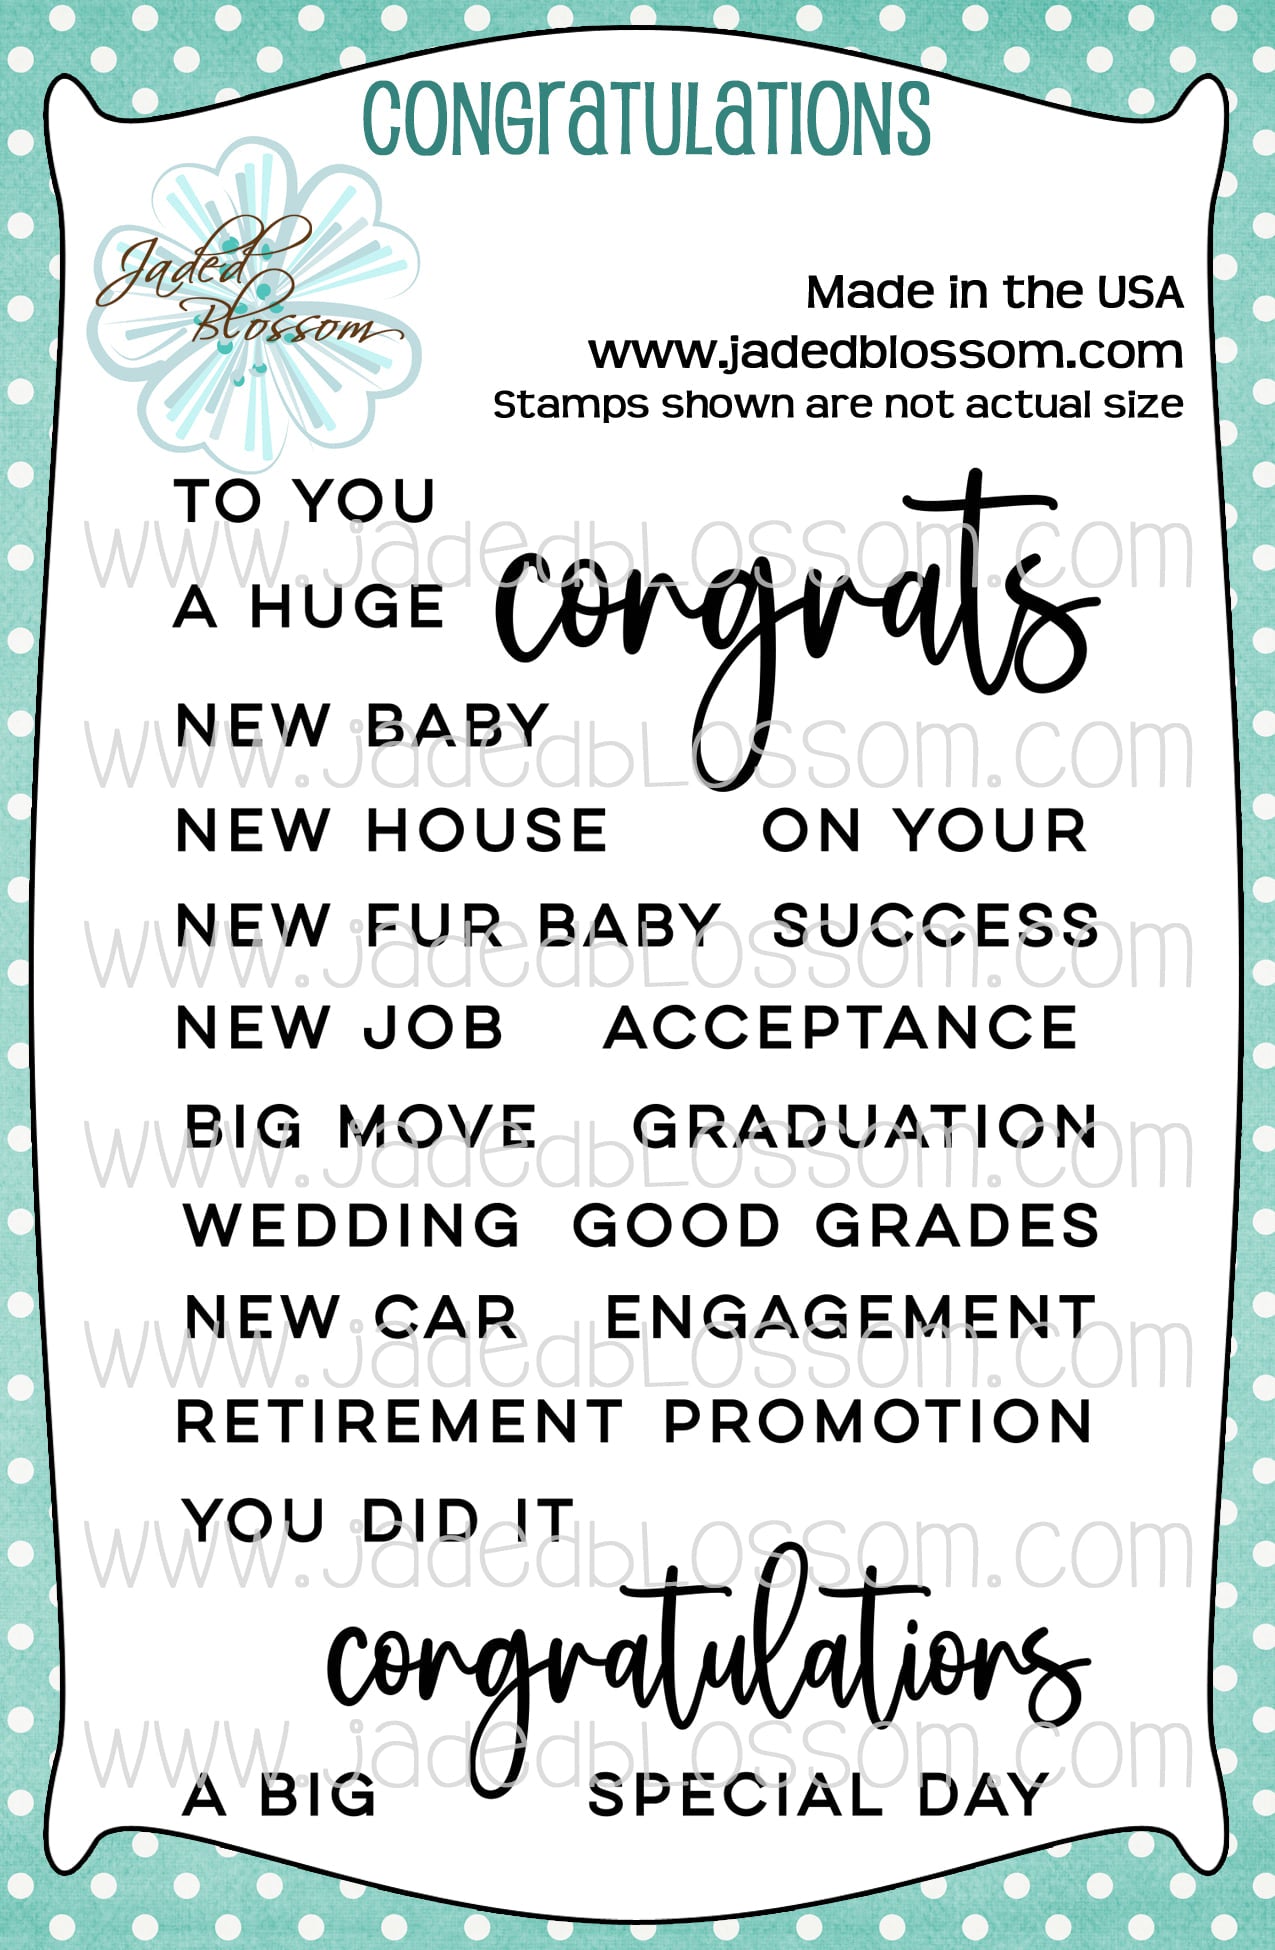 Nutz about Stamping: Congratulations